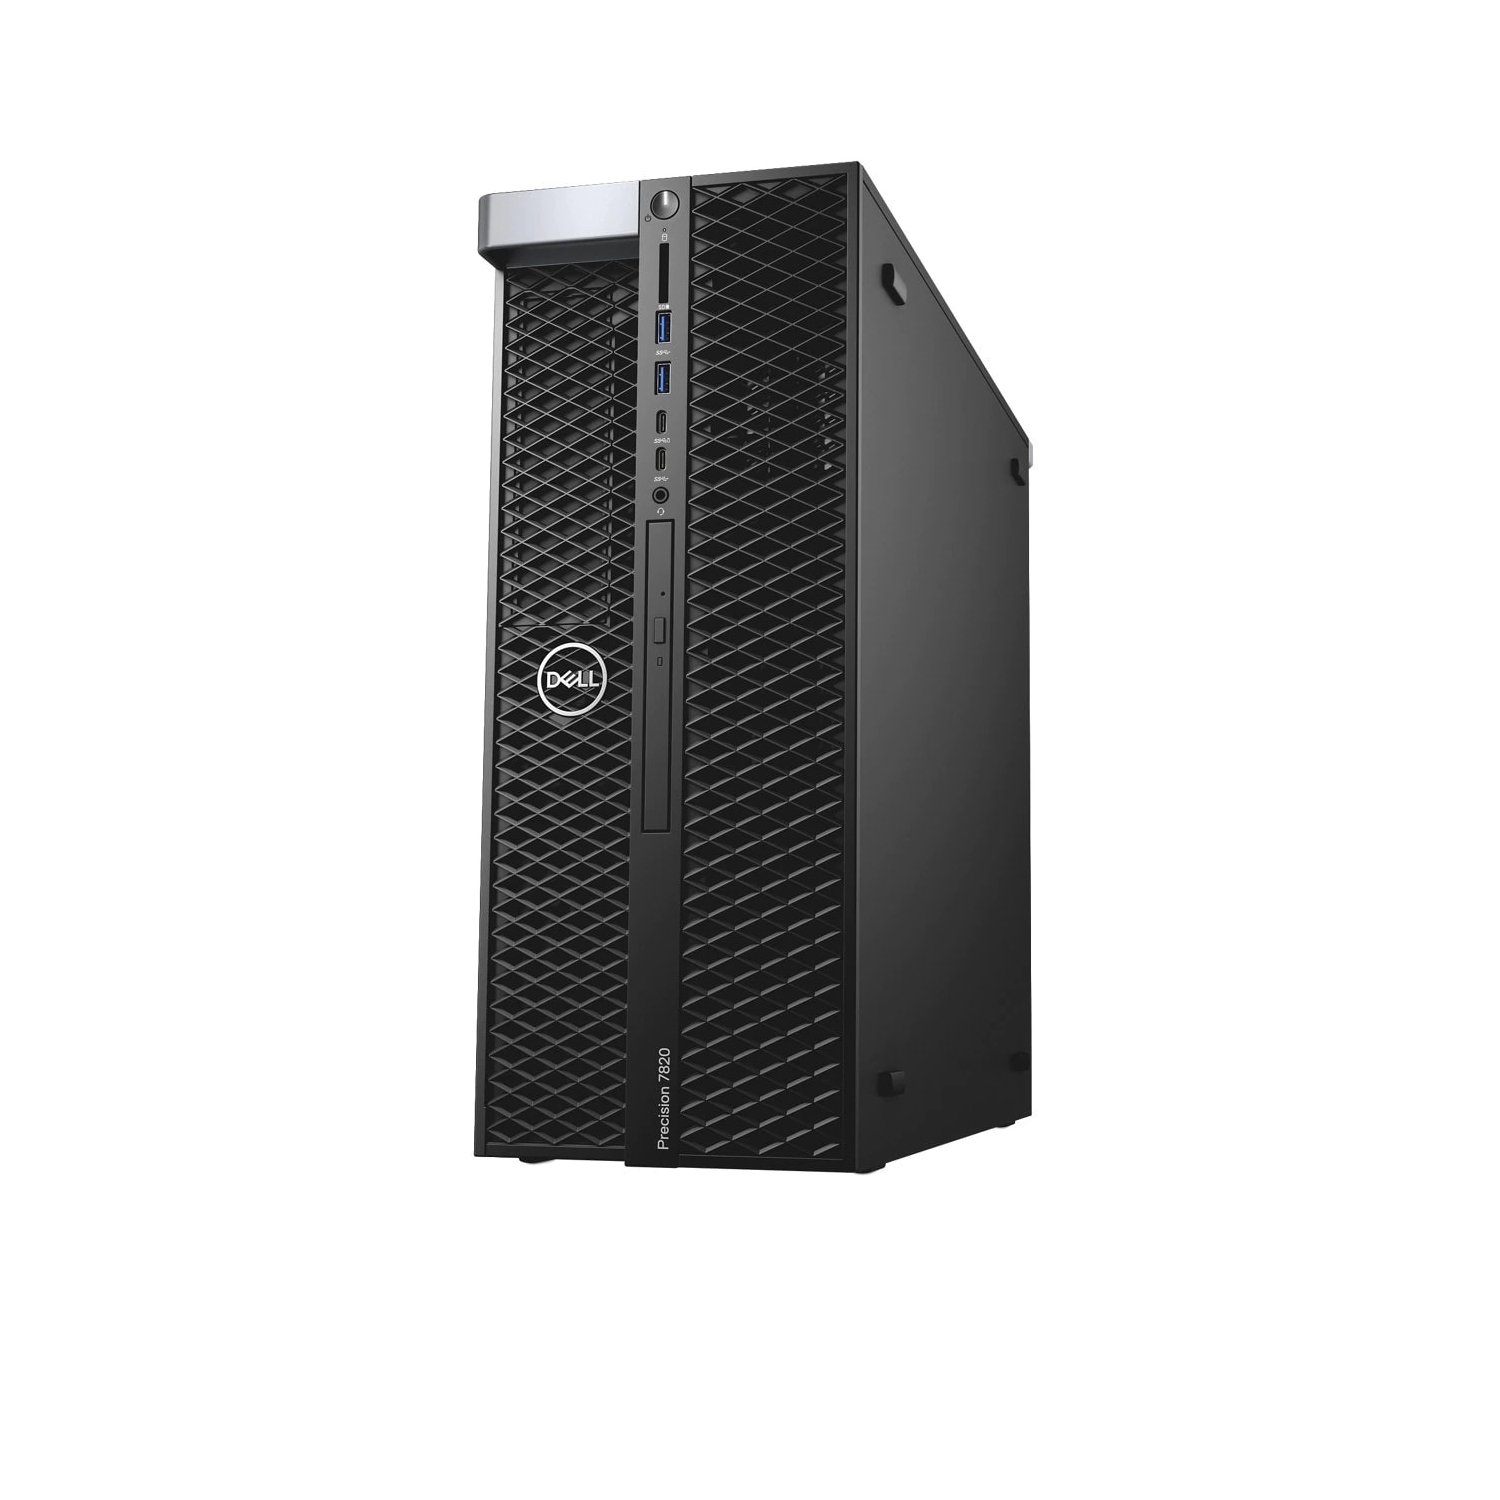 Refurbished (Excellent) - Dell Precision T7820 Workstation Desktop (2018), Core Xeon Silver, 2TB HDD + 256GB SSD, 64GB RAM, RTX 4000, 8 Cores @ 3.2 GHz Certified